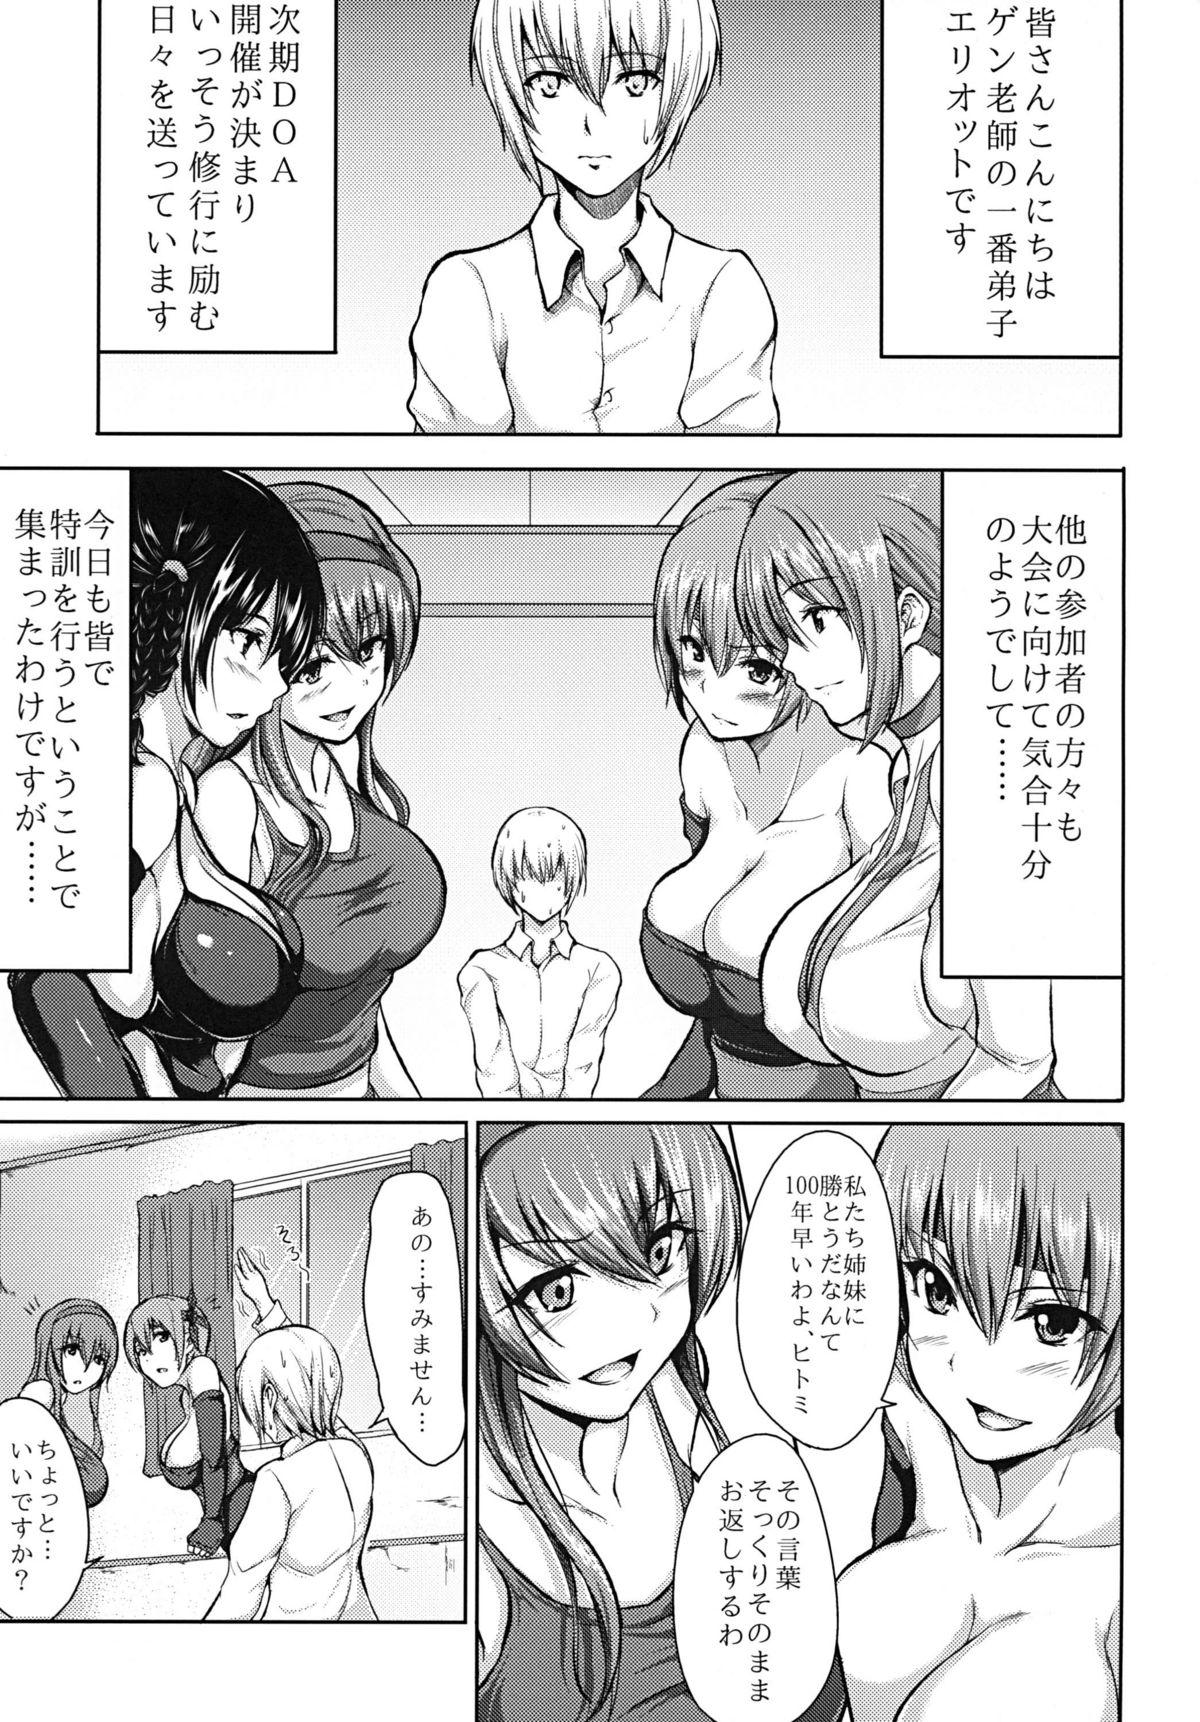 Private DOA Harem 2 - Dead or alive 8teen - Page 3